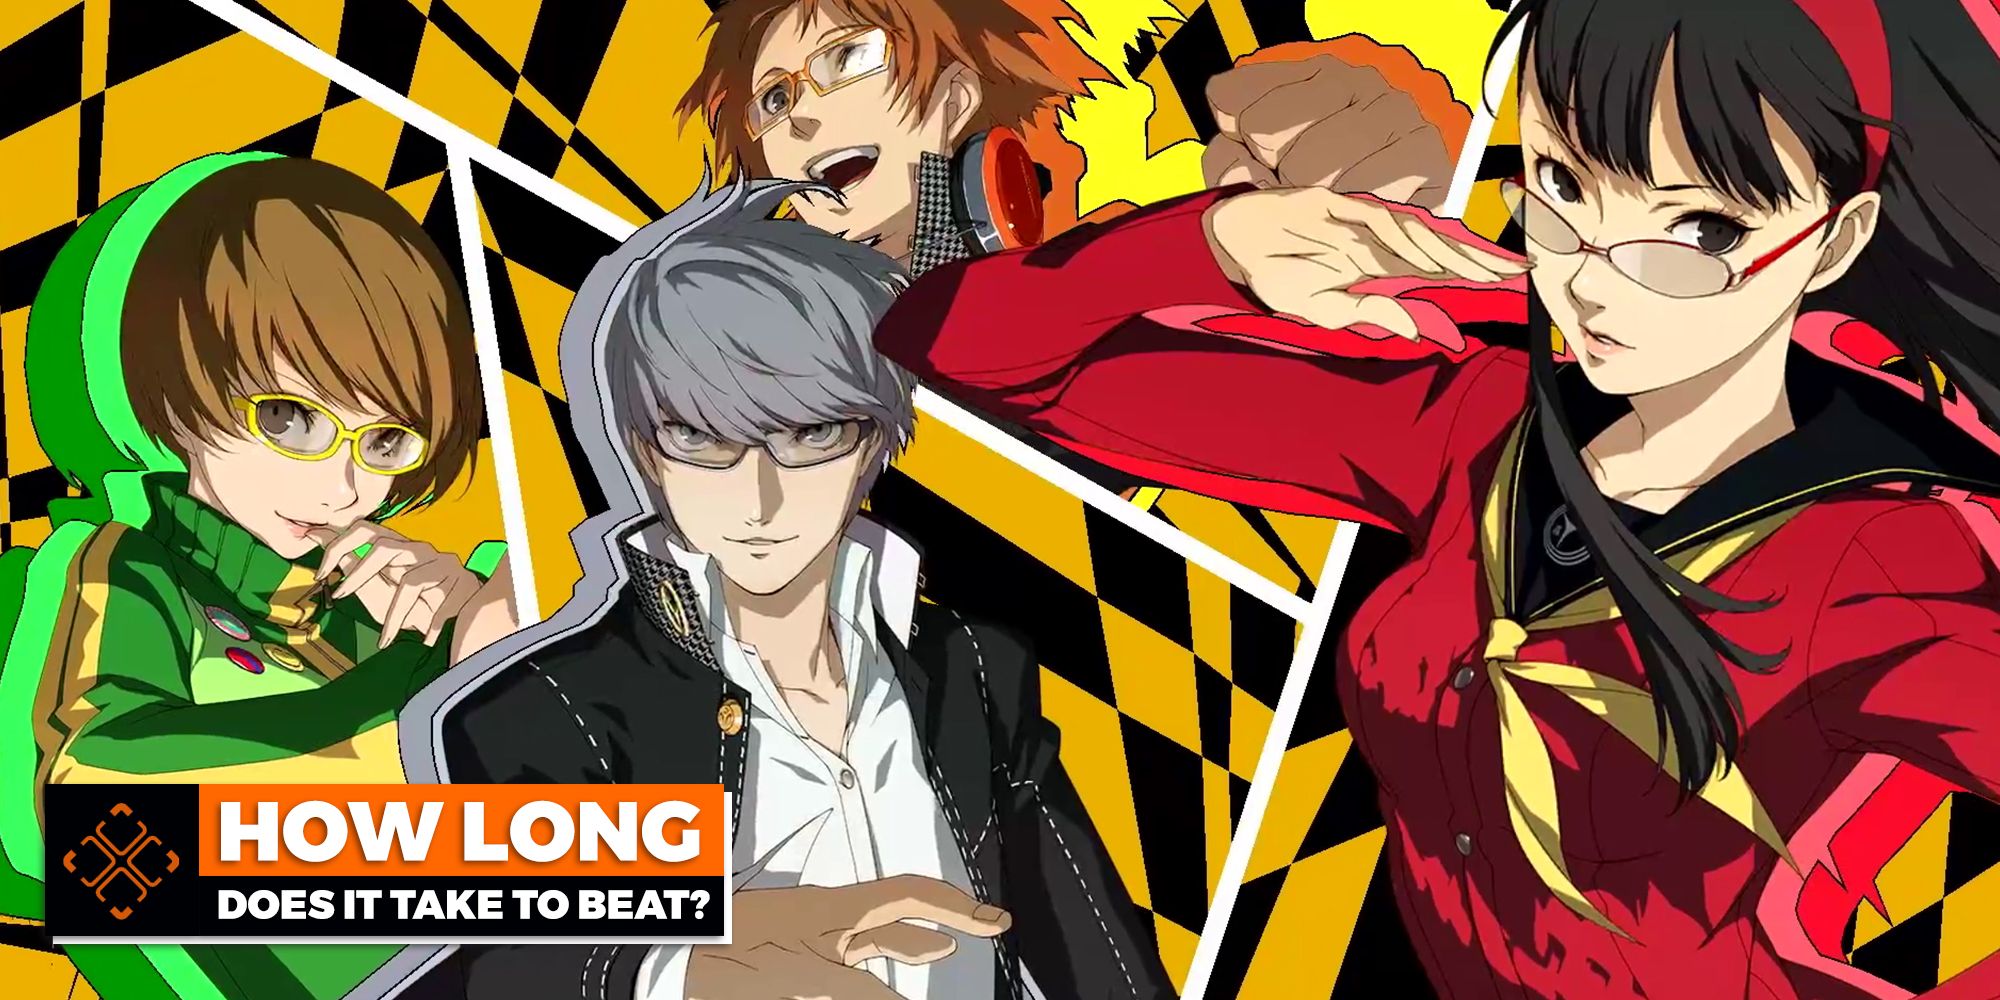 Game art from Persona 4 Golden.